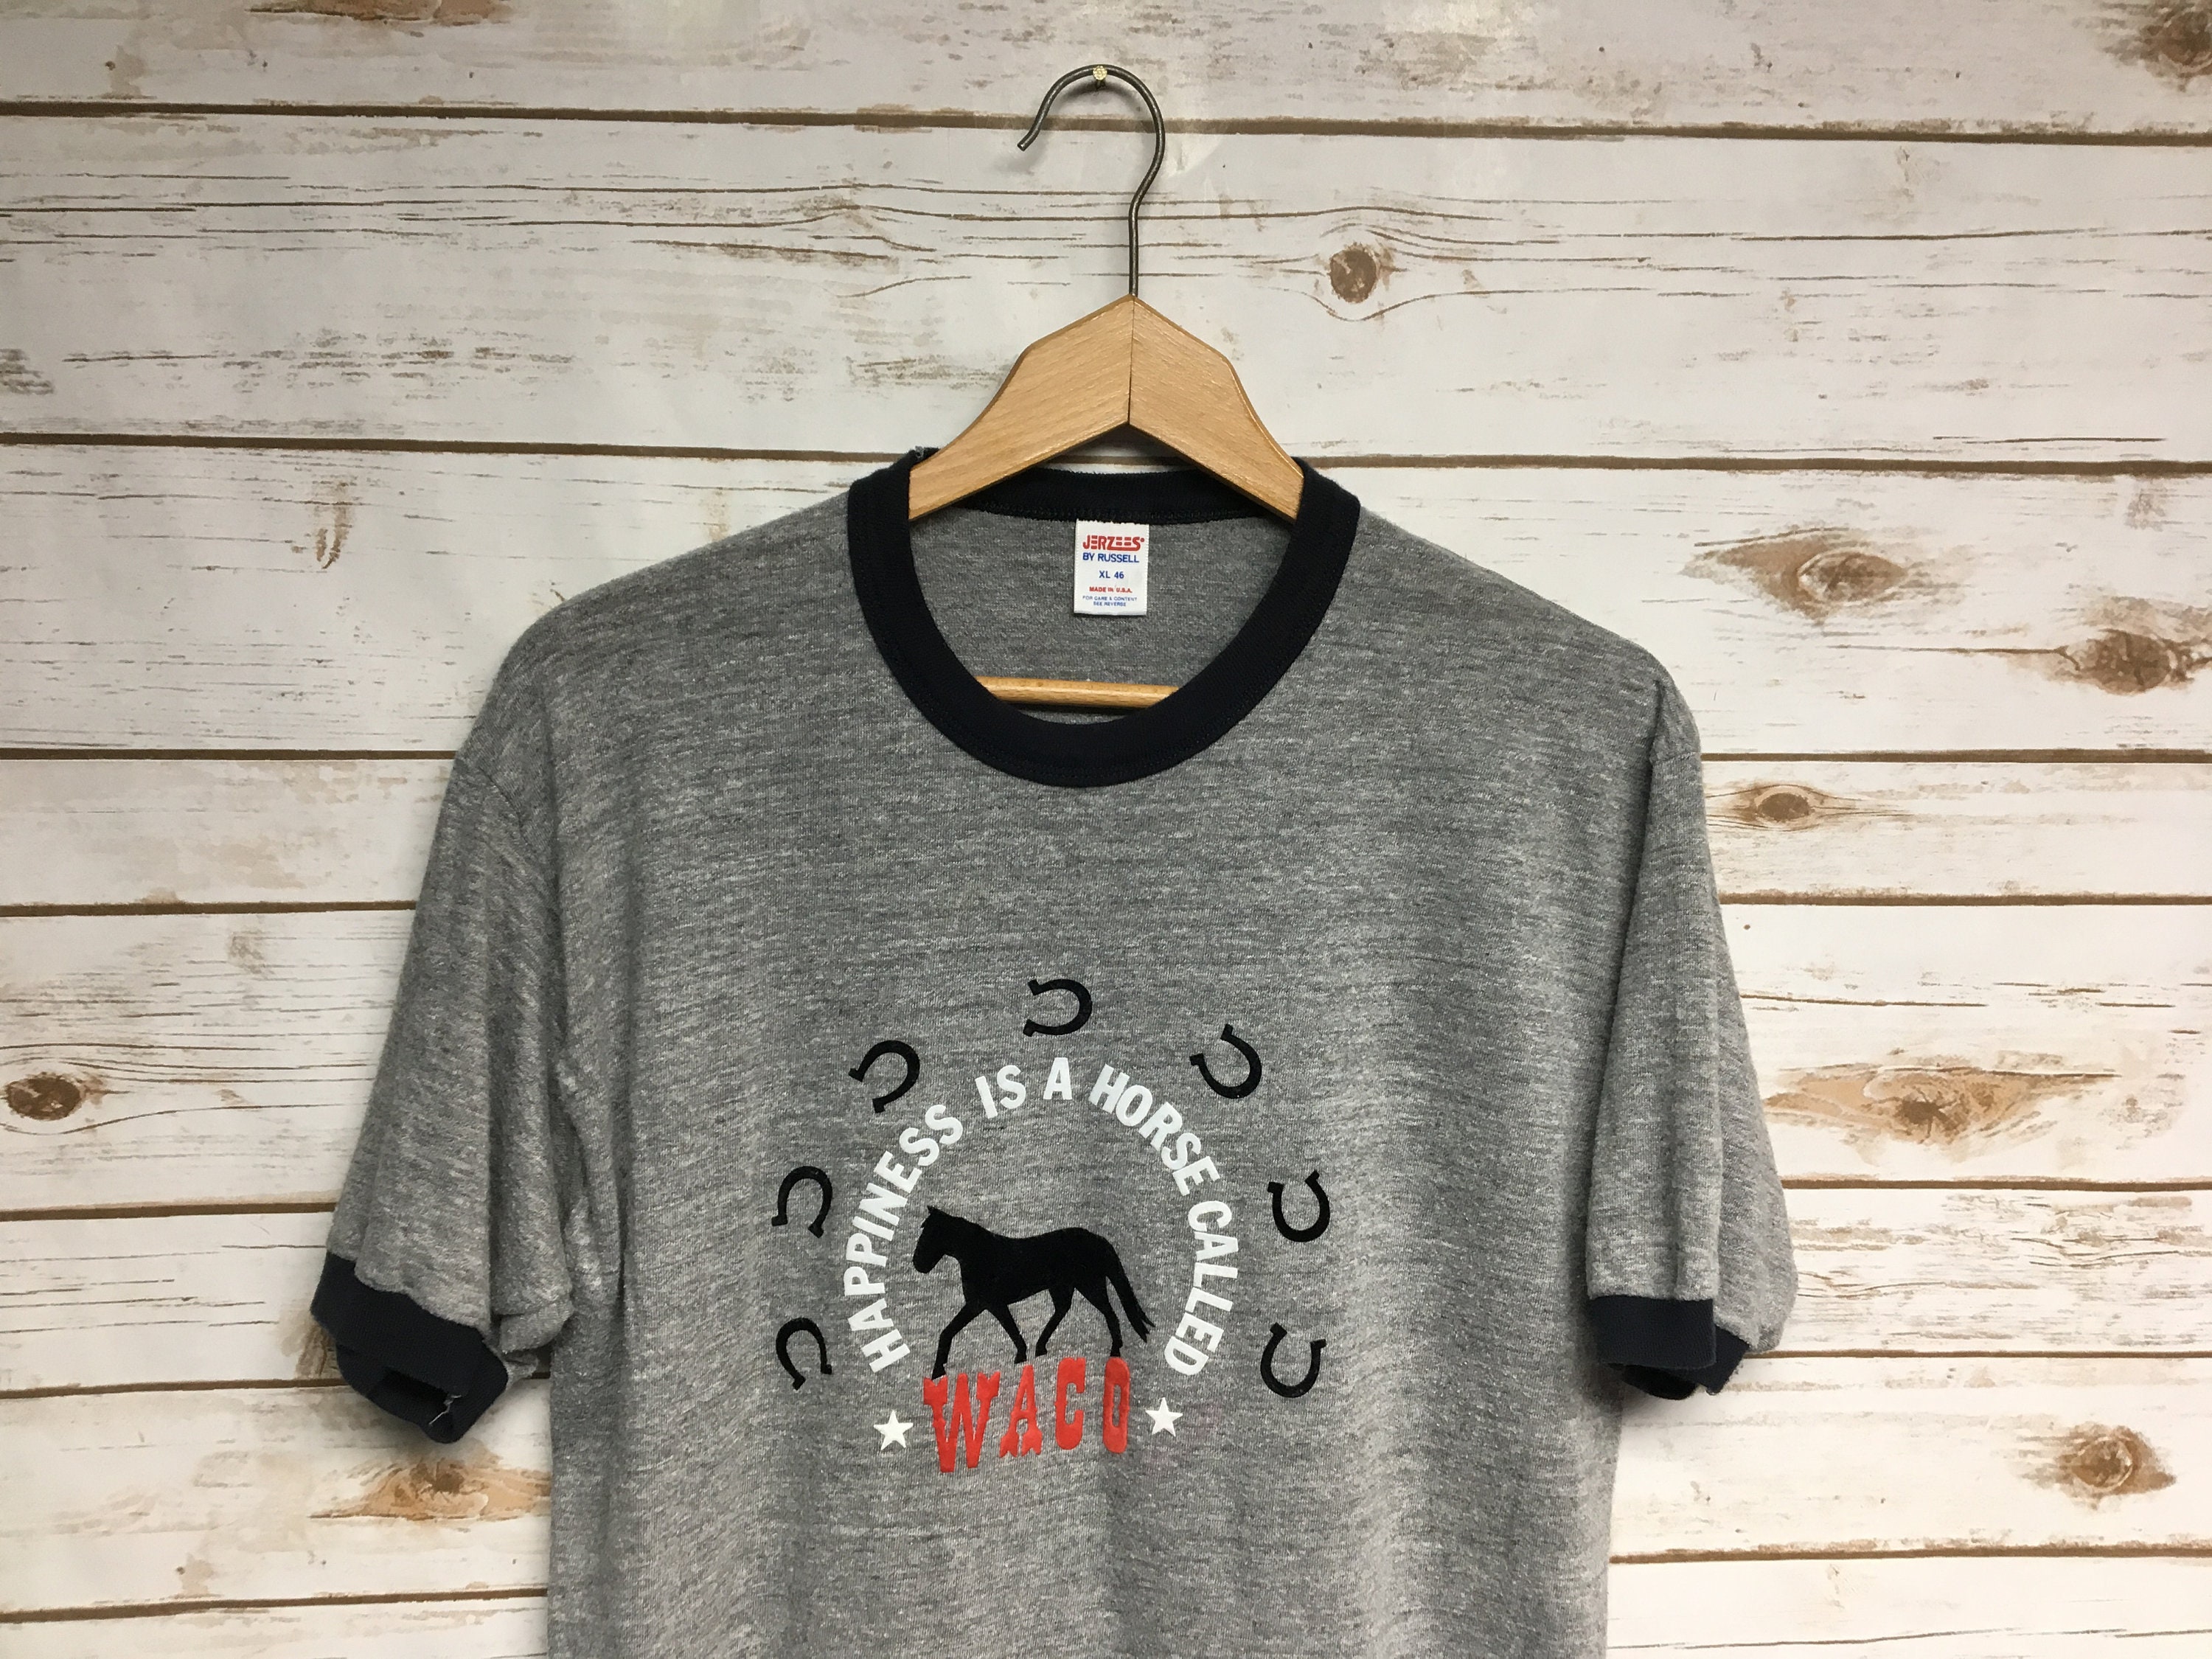 Vintage 70's 80's Ringer Tri Blend Rayon Jerzees T Shirt Happiness Is A Horse Called Waco Heather Gray That Show - Medium/Large